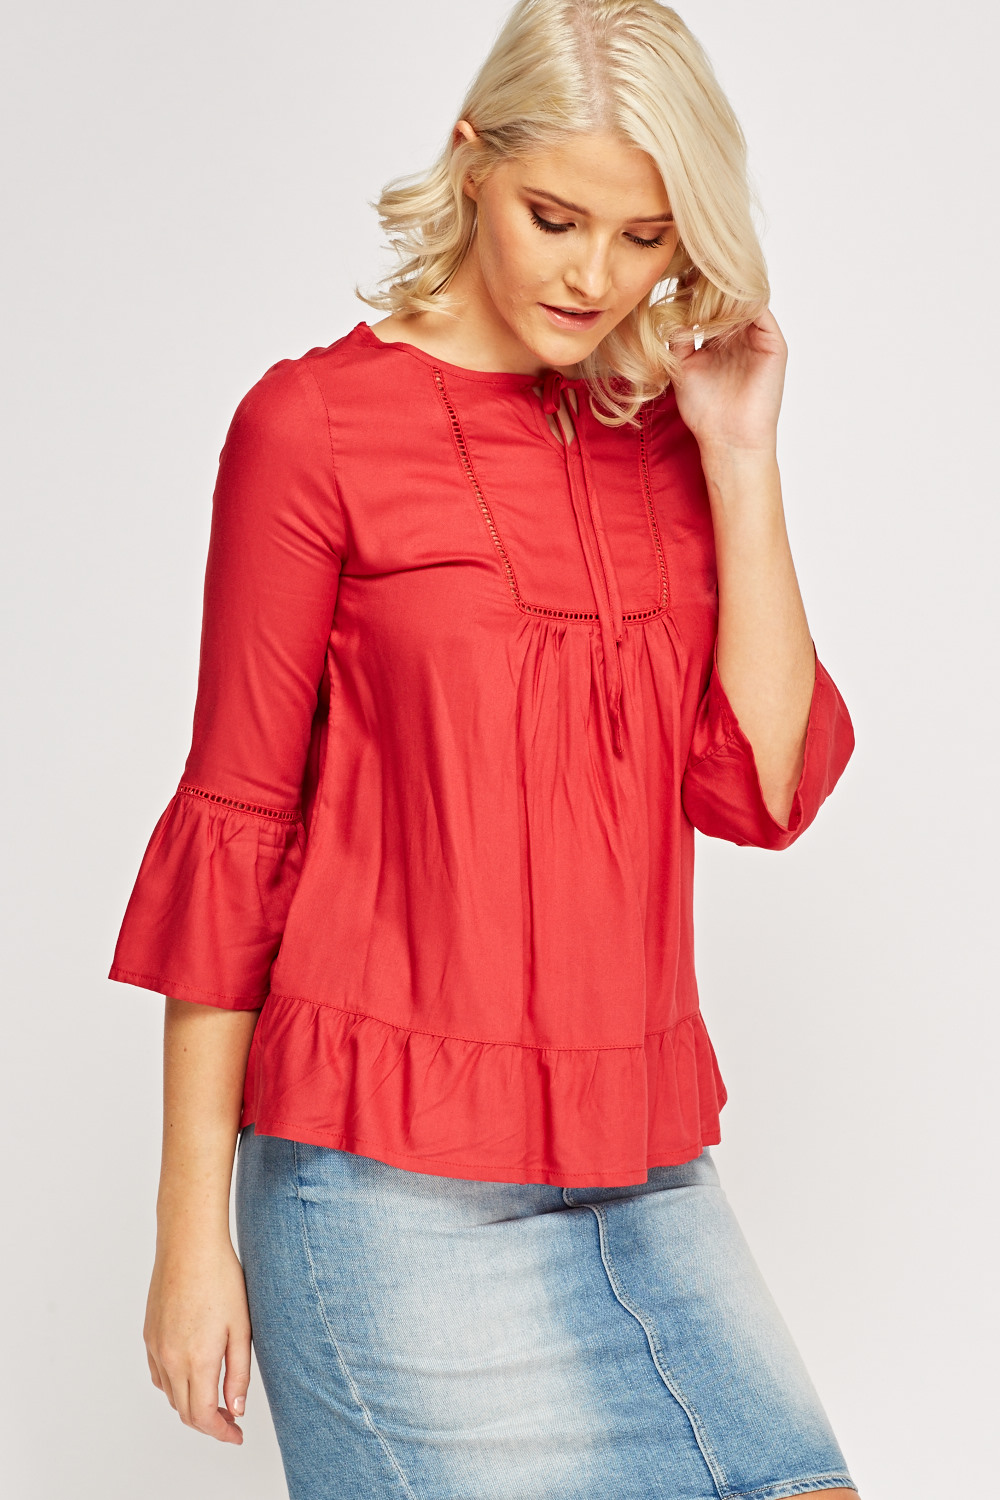 Dark Red Flared Top - Just $6